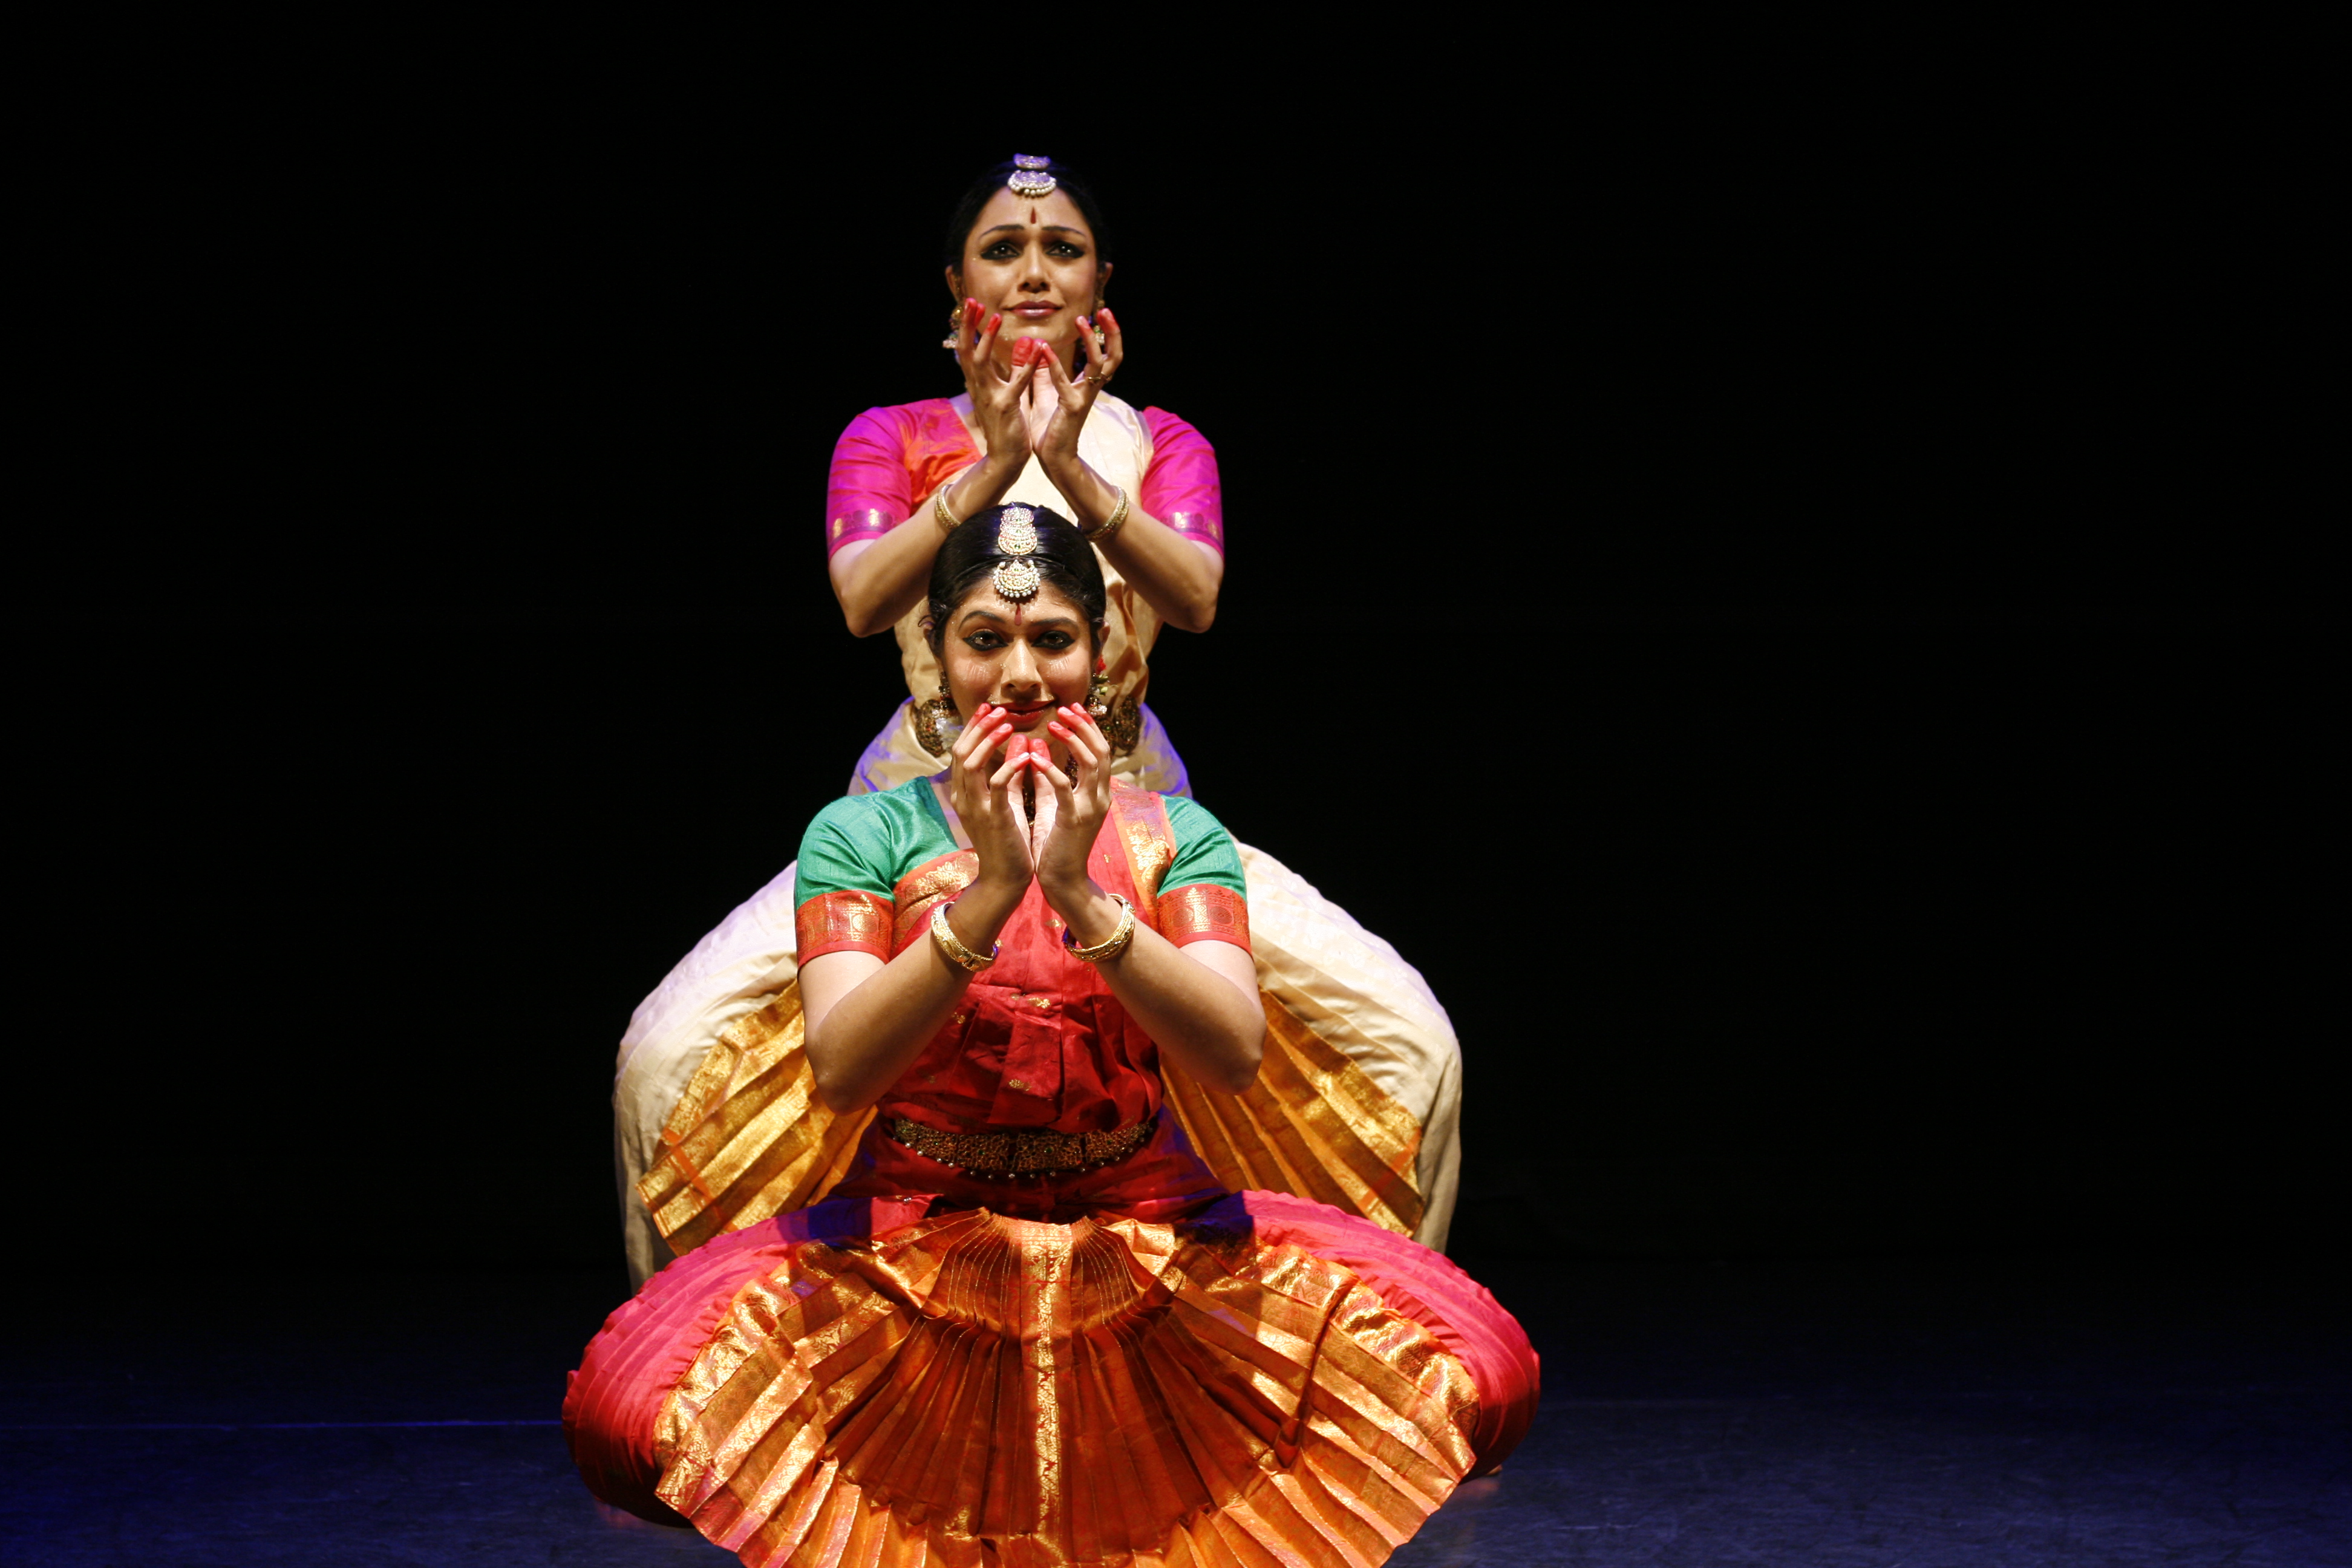  Europe’s finest festival of Indian arts returns to Liverpool